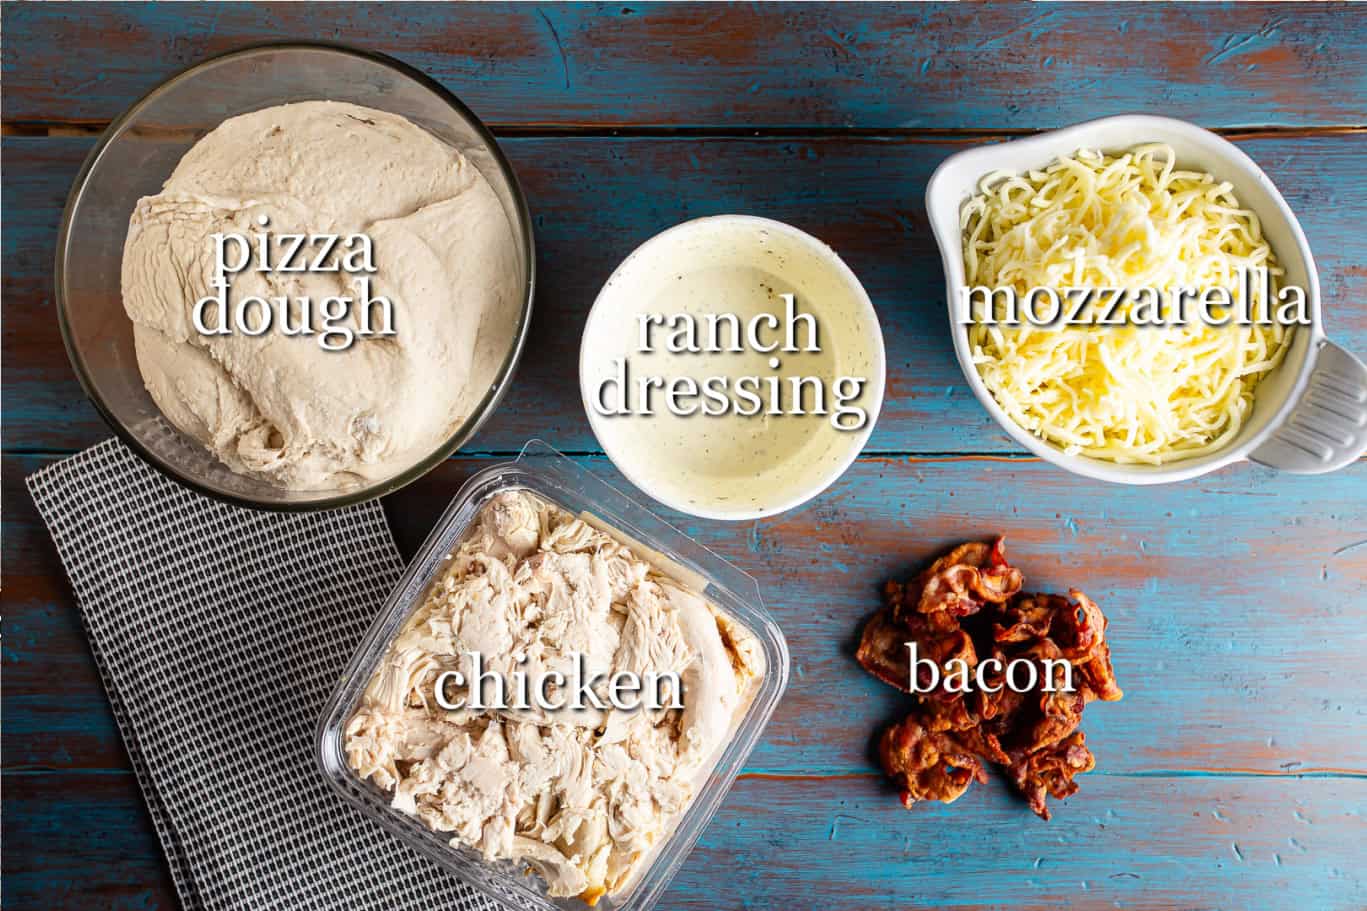 Ingredients for making homemade chicken bacon ranch pizza, with text labels.